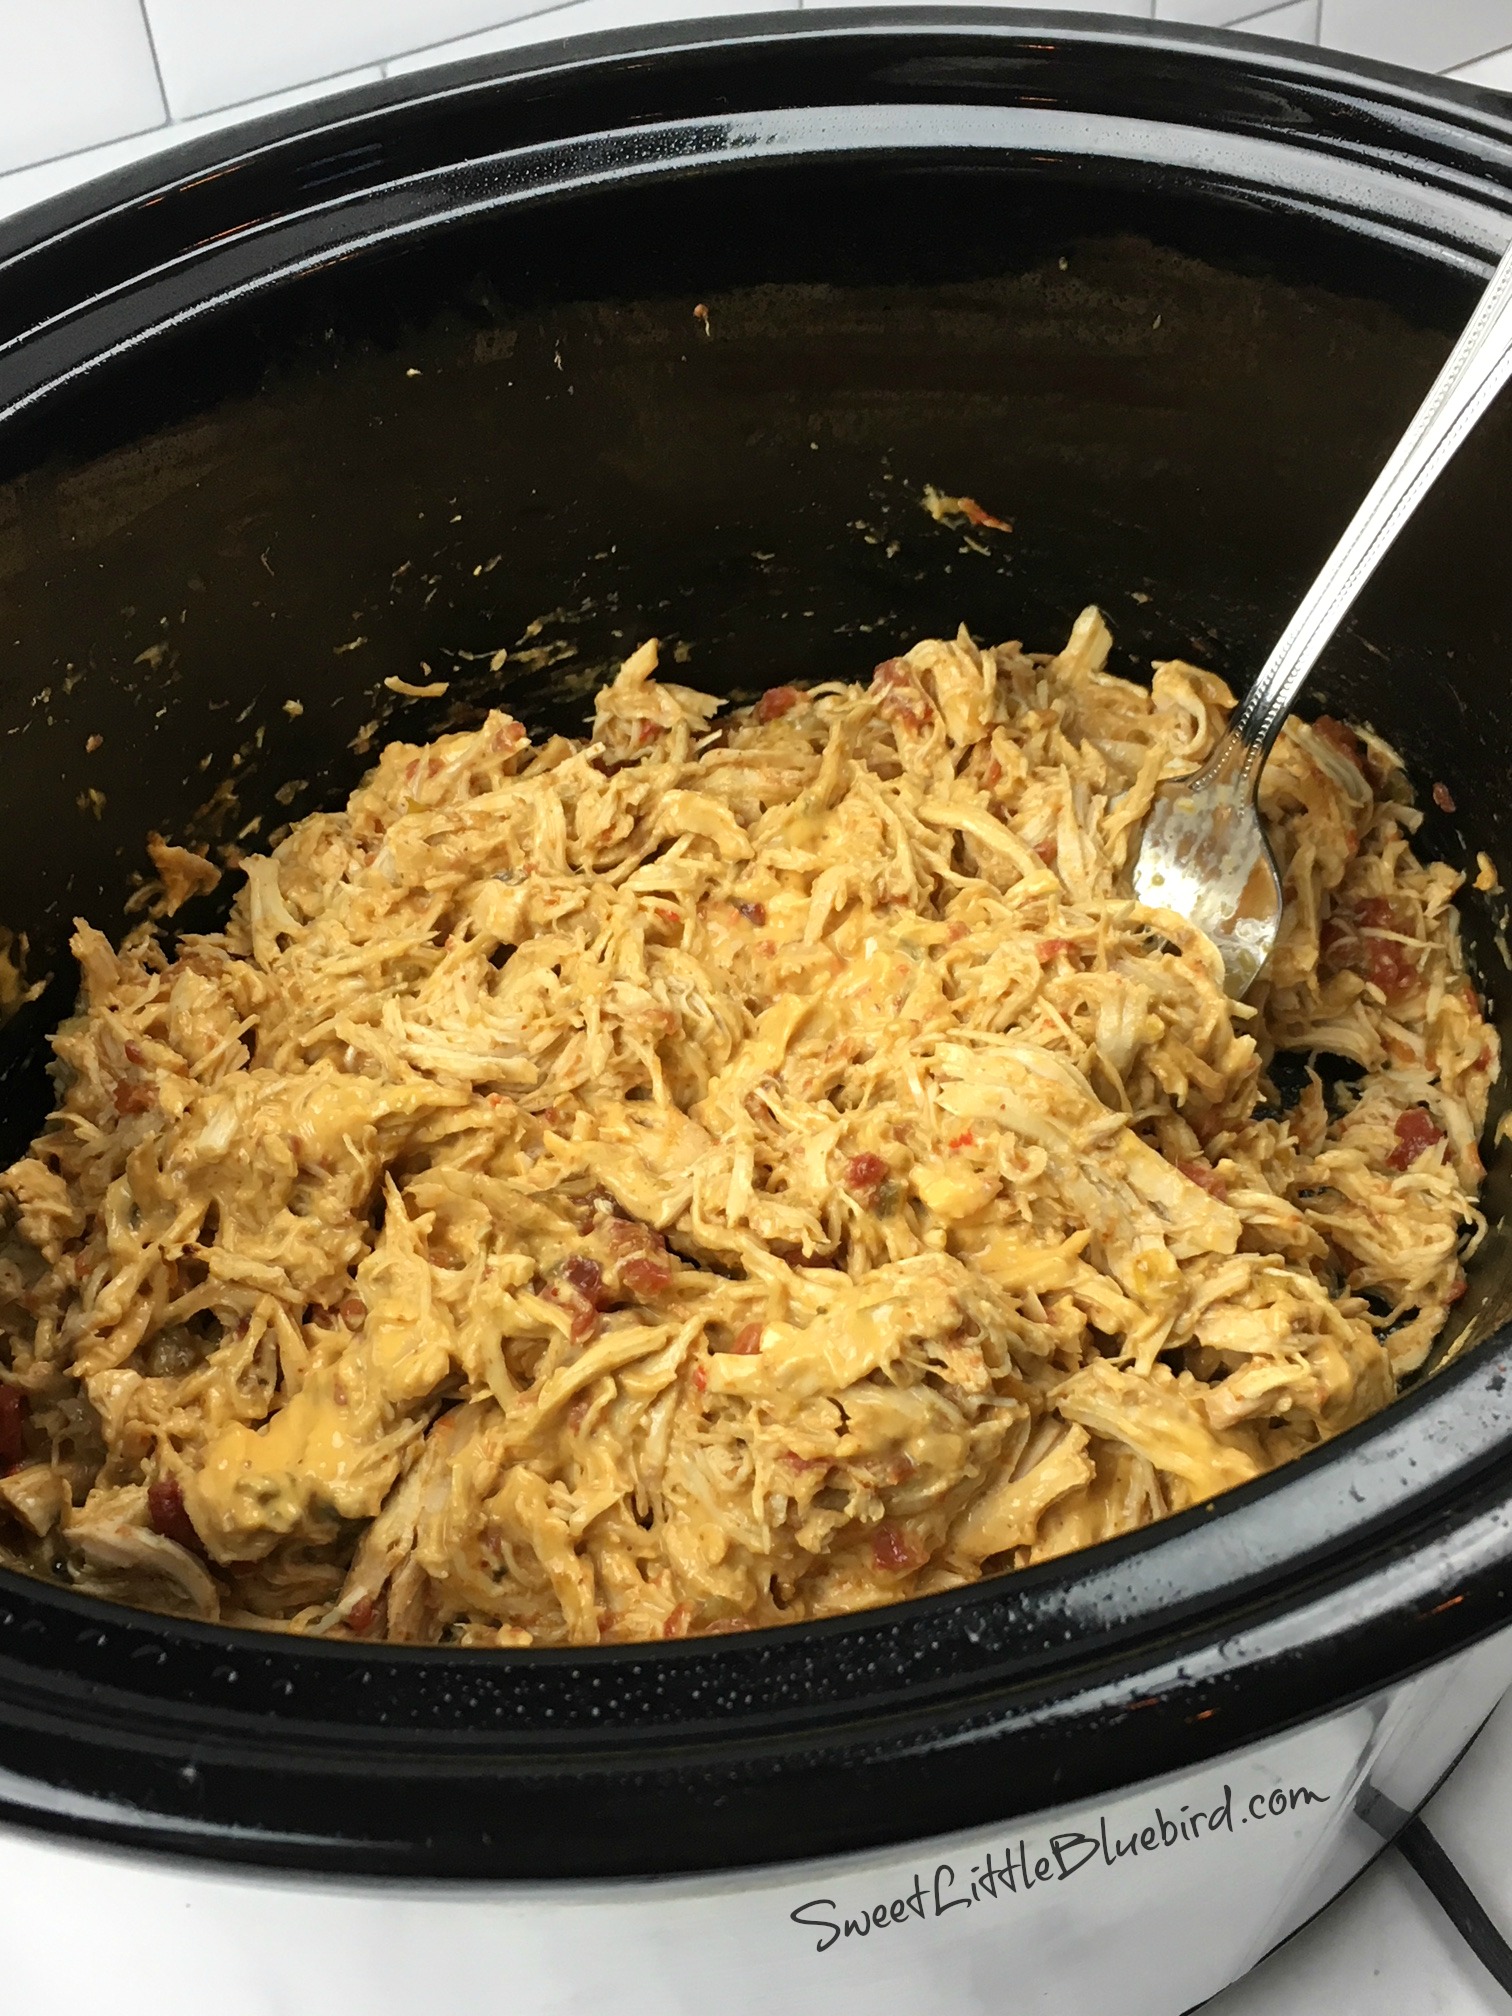 This is a photo of the chicken inside the slow cooker after cooking, shredded with the queso mixed in and ready to serve.